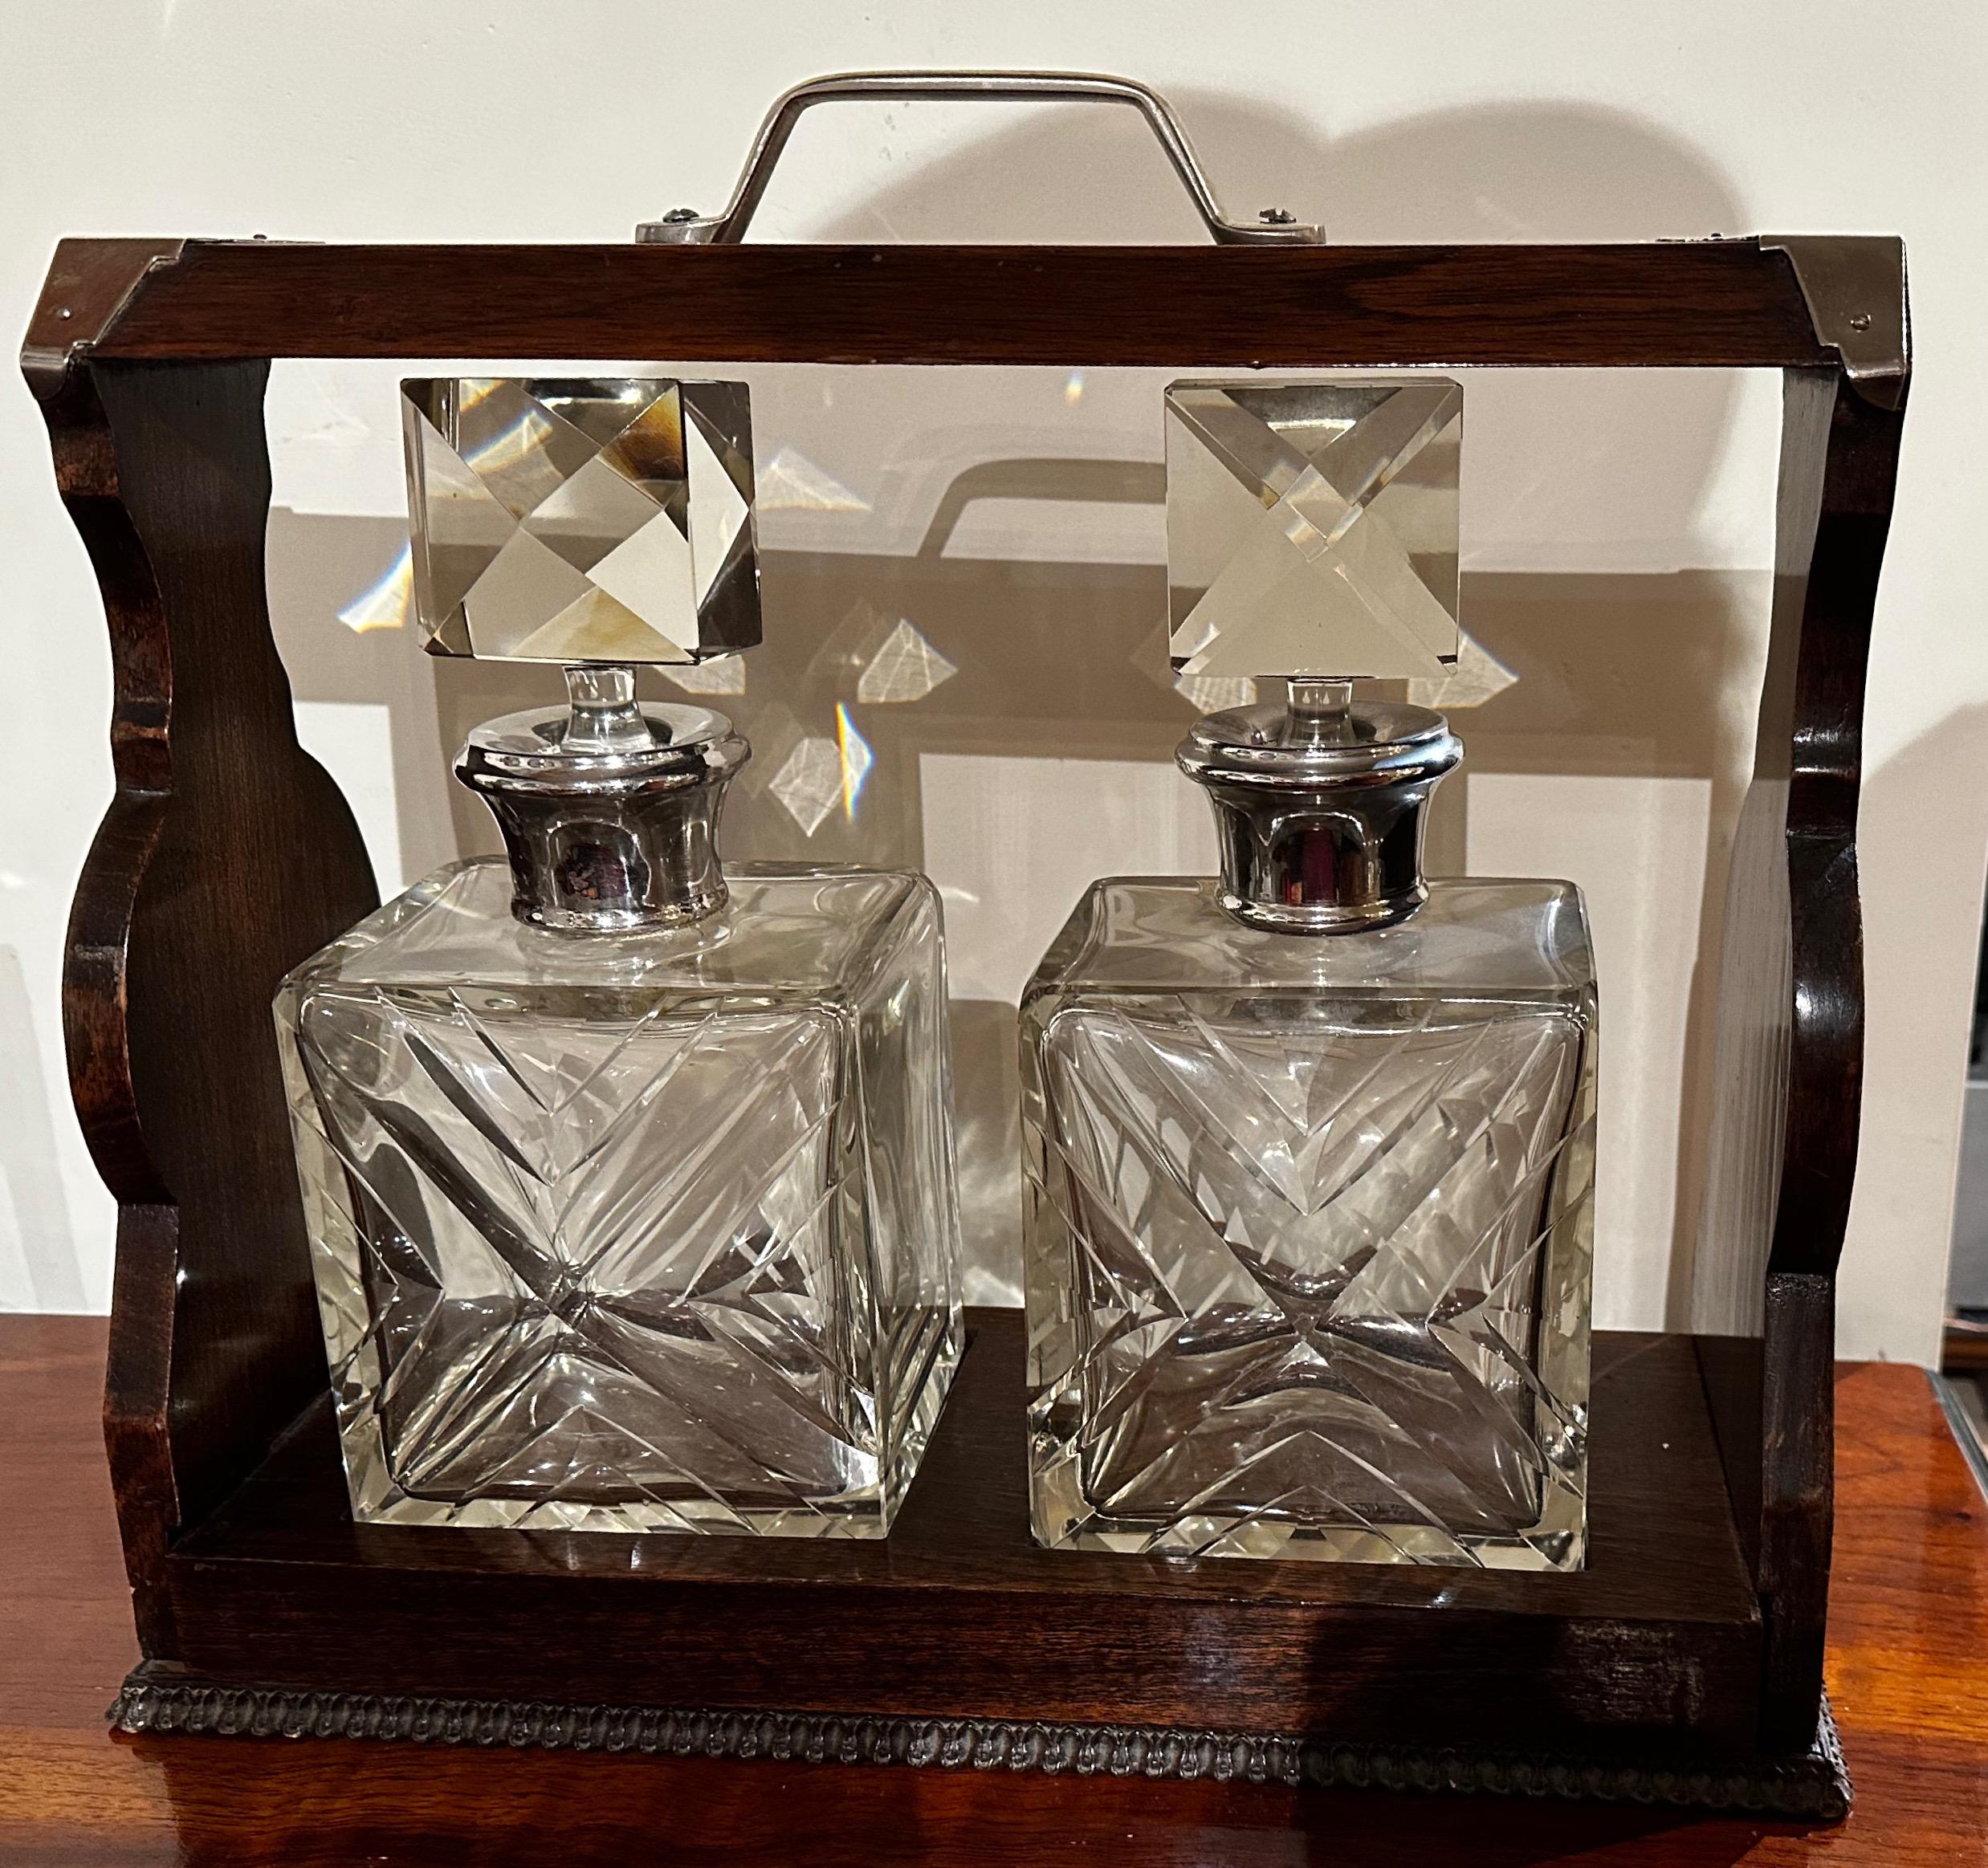 Tantalus two Decanter Art Deco set with wood holder is a beautiful and functional piece of barware that adds to the culture and distinction from the art of the cocktail. This set includes two decanters and a wooden holder, all designed with the